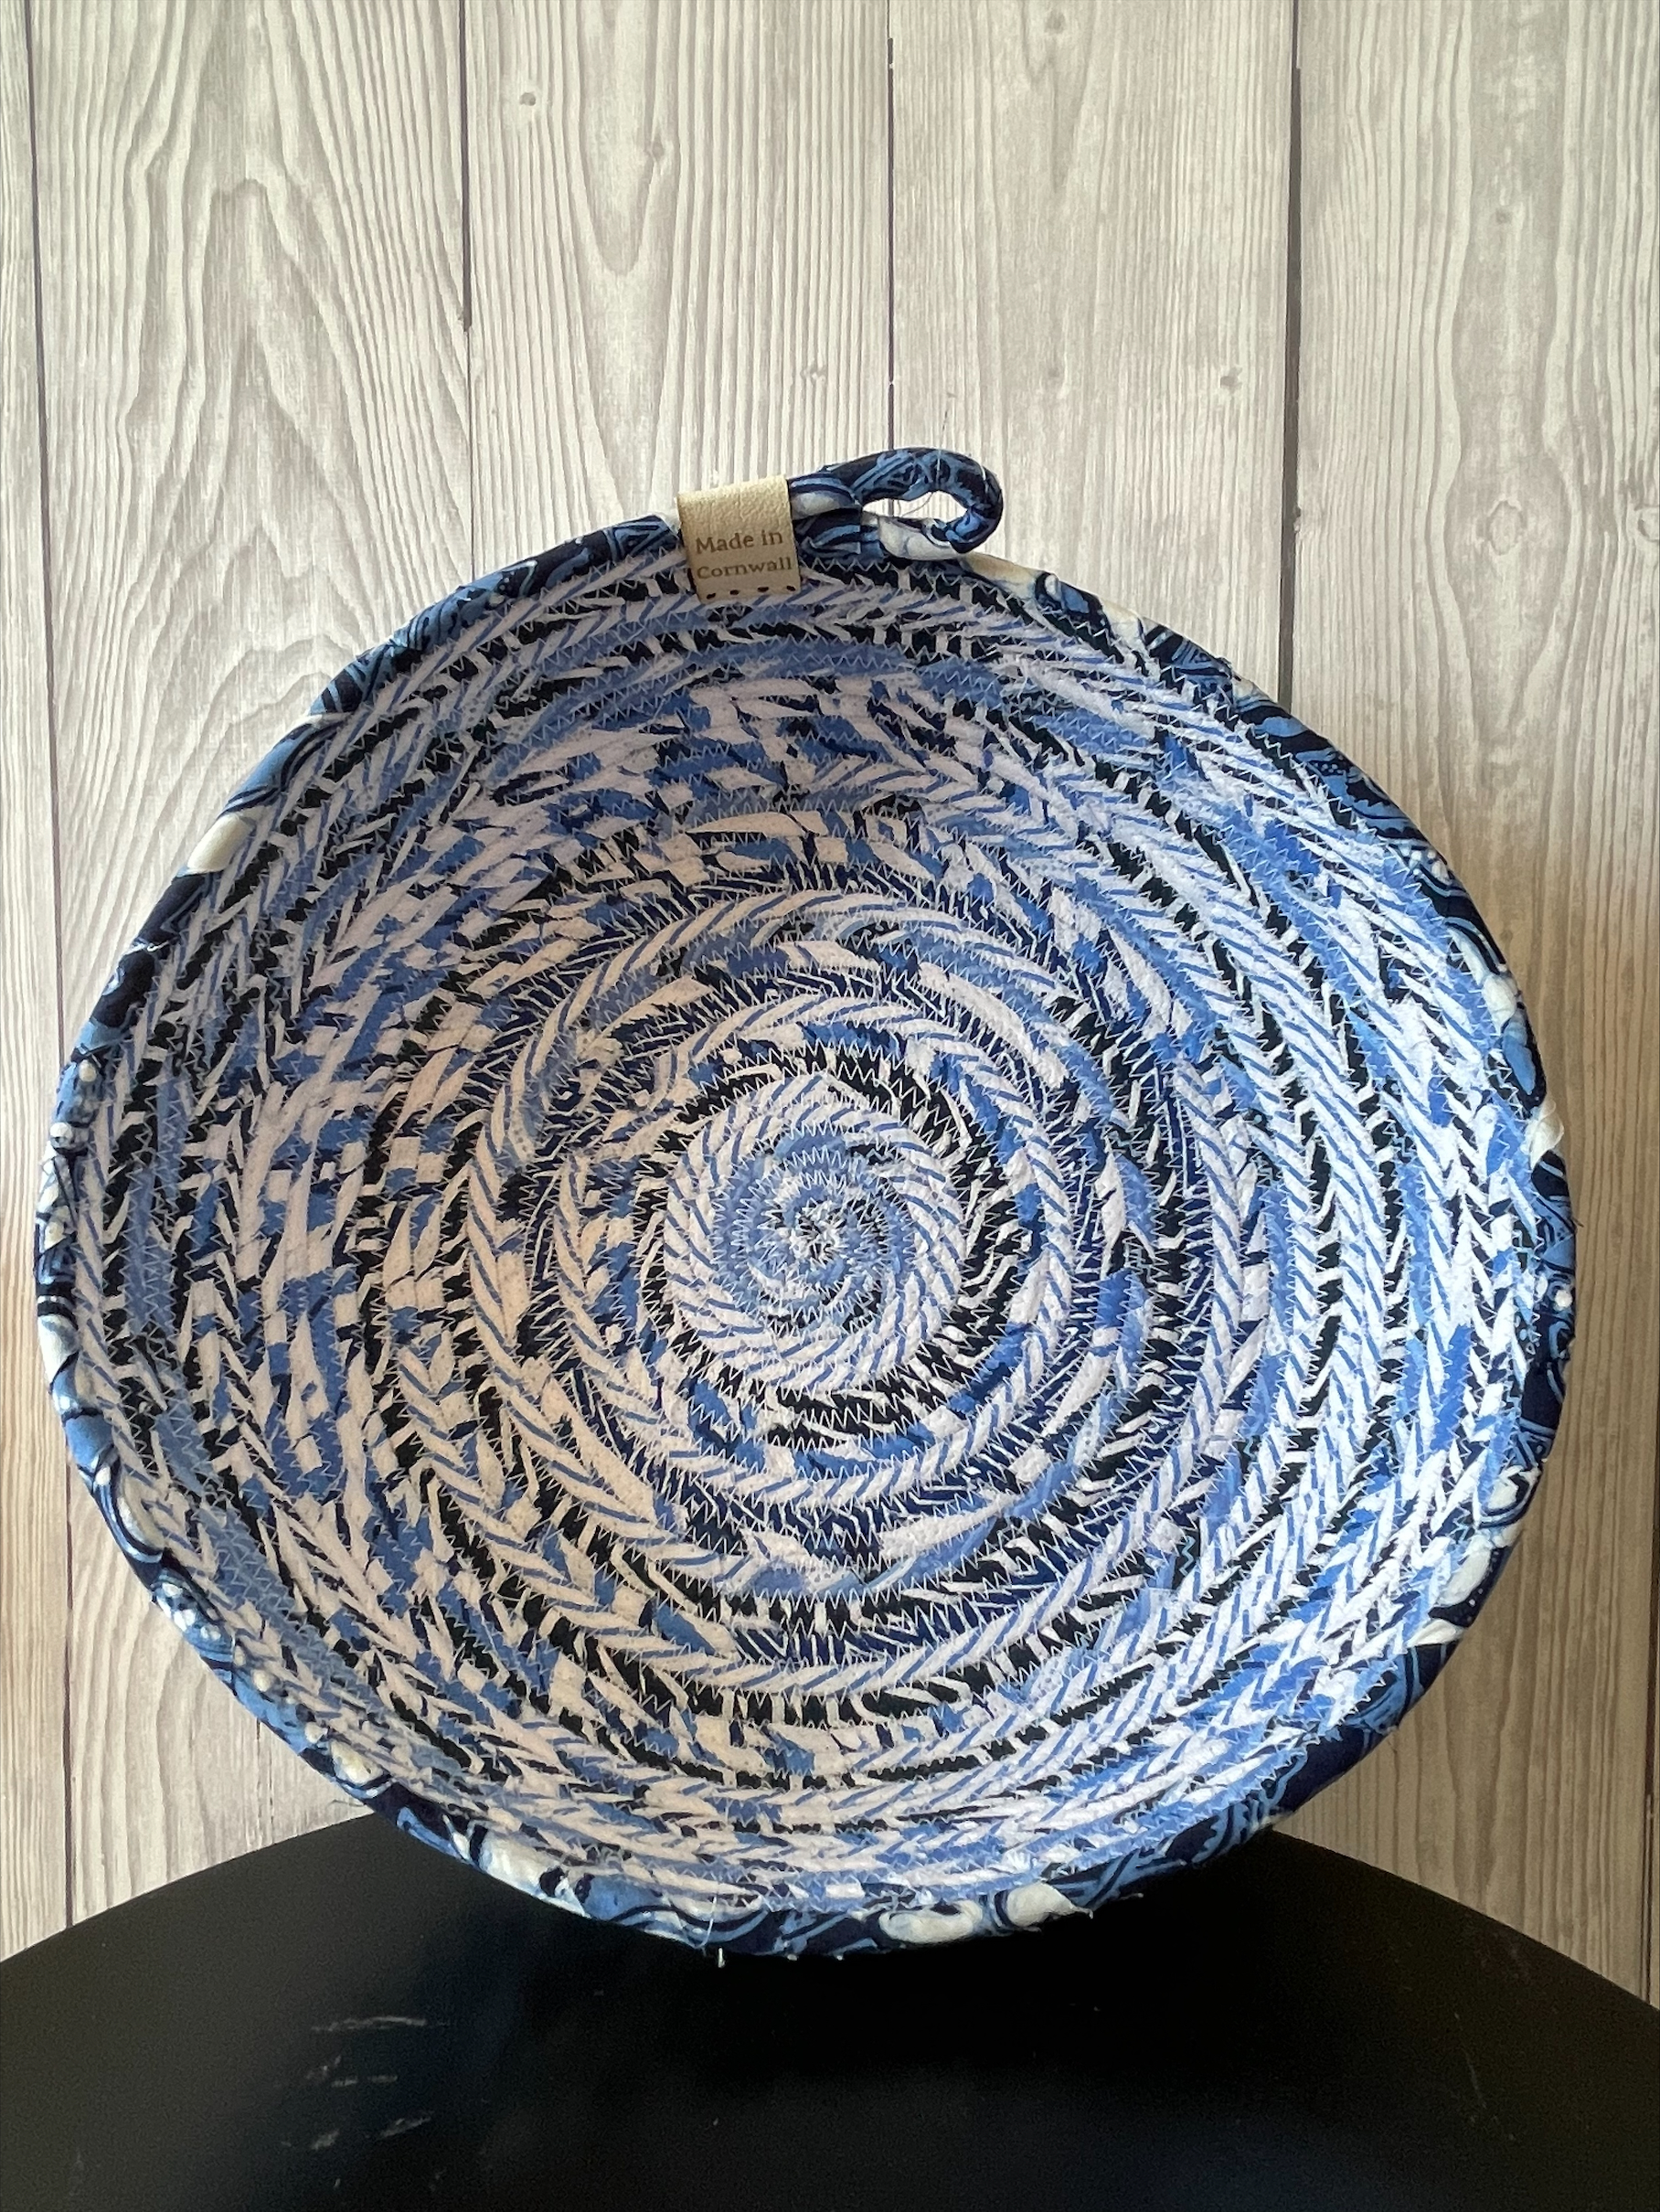 China Blue” Fabric wrapped Rope Bowl.